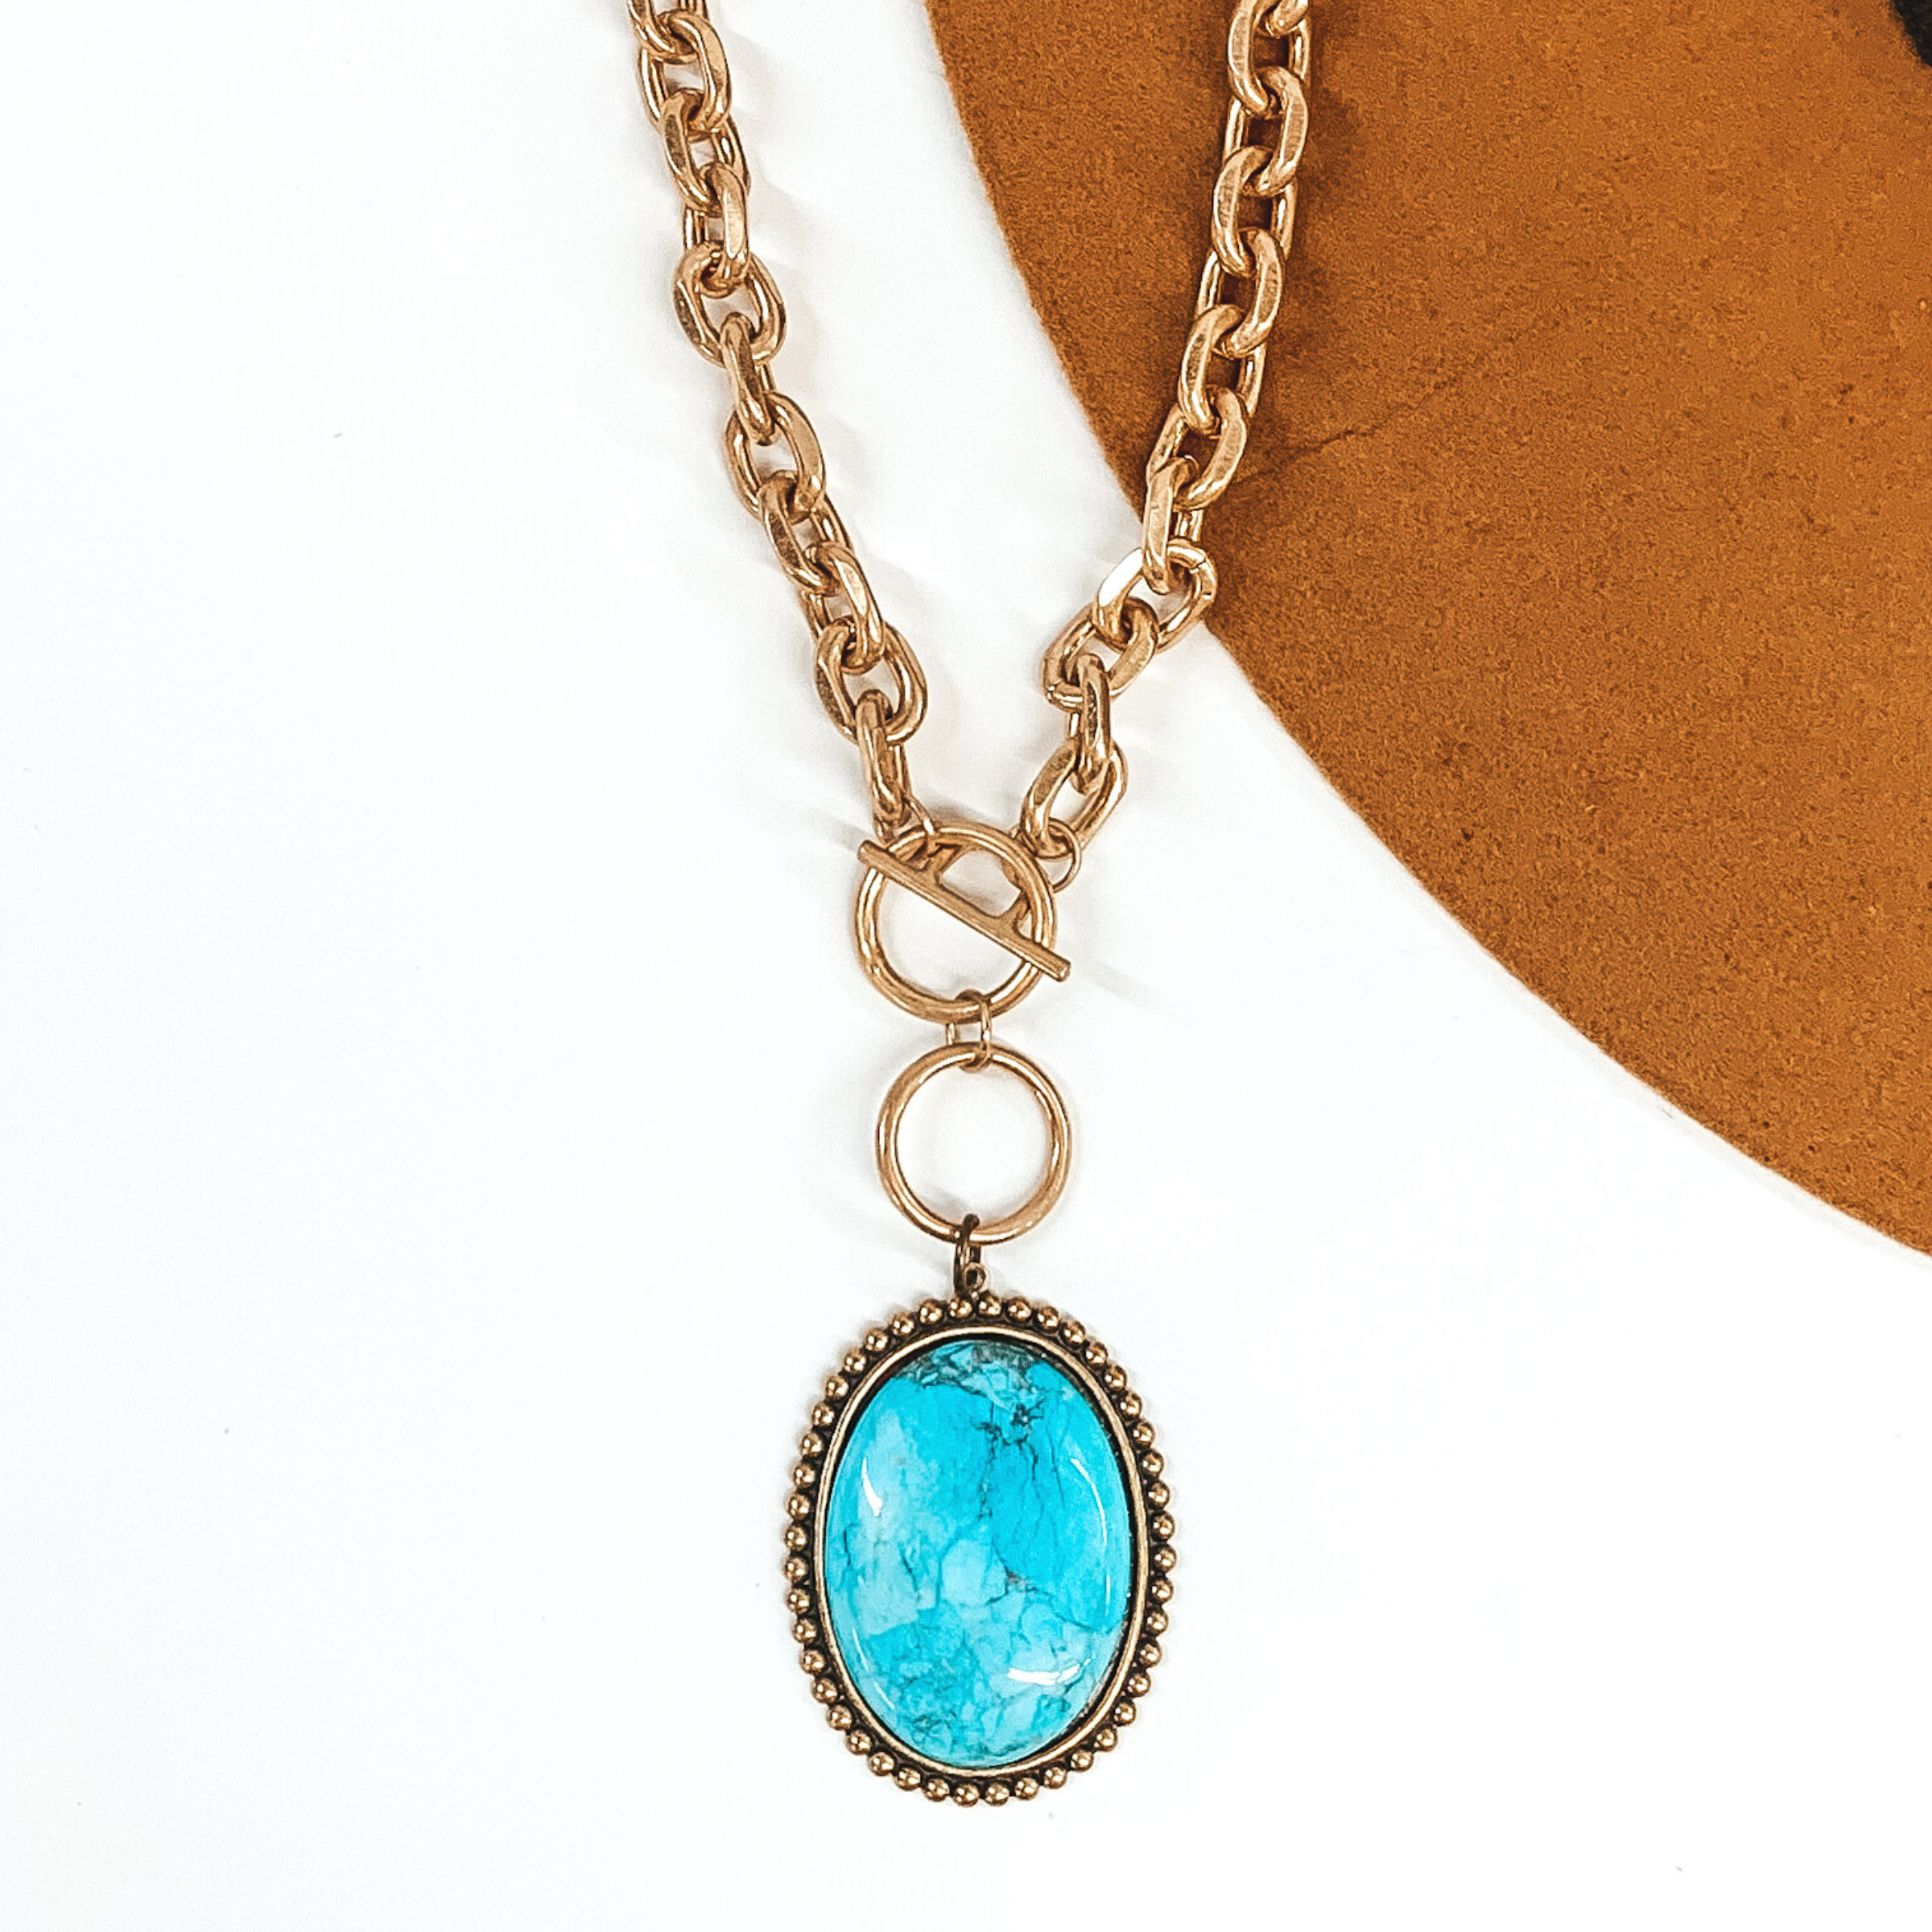 Bronze set oval pendant with turquoise cabochon stone. It is hanging from a toggle front clasp on a matte gold chain link necklace. This necklace is pictured on a white and camel background. 